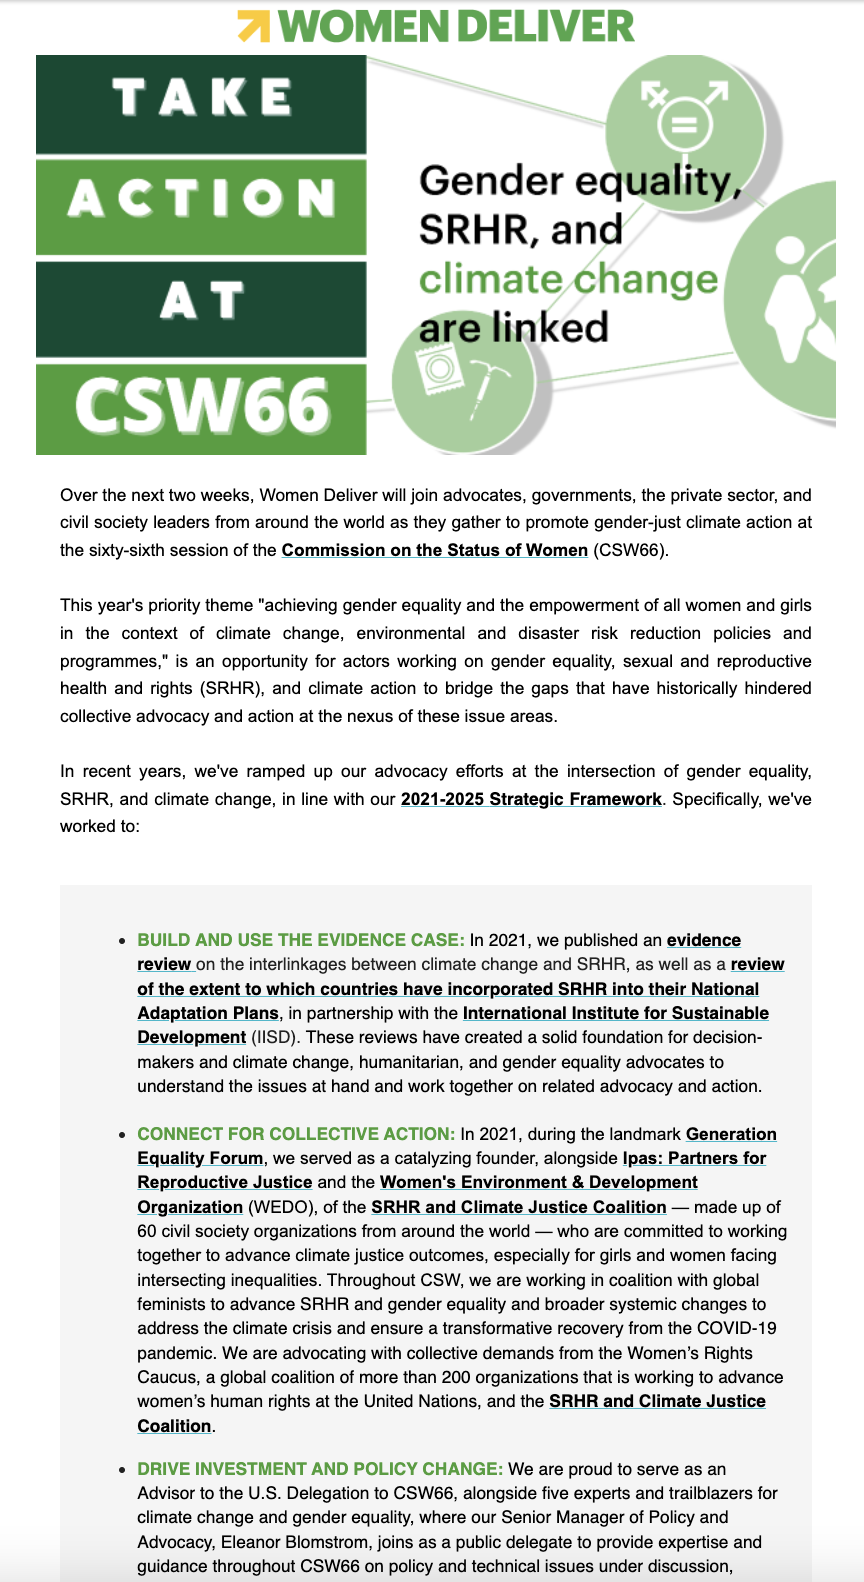 Take Action At CSW66